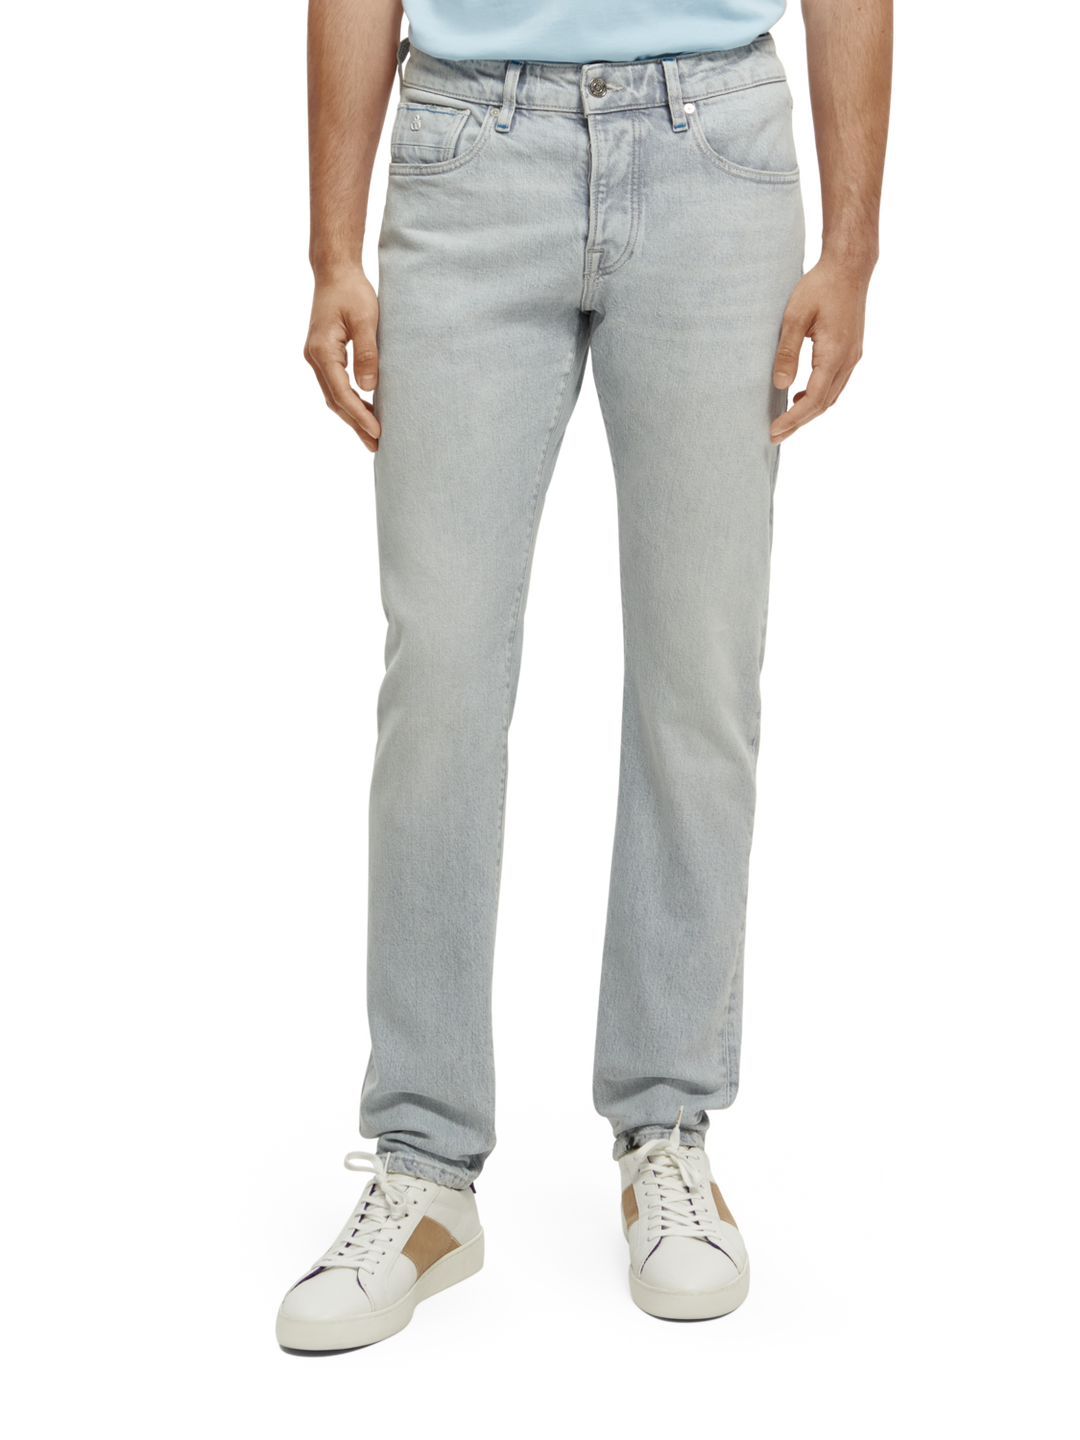 Ralston Good Vibes Regular Slim Fit Jeans | Buster McGee